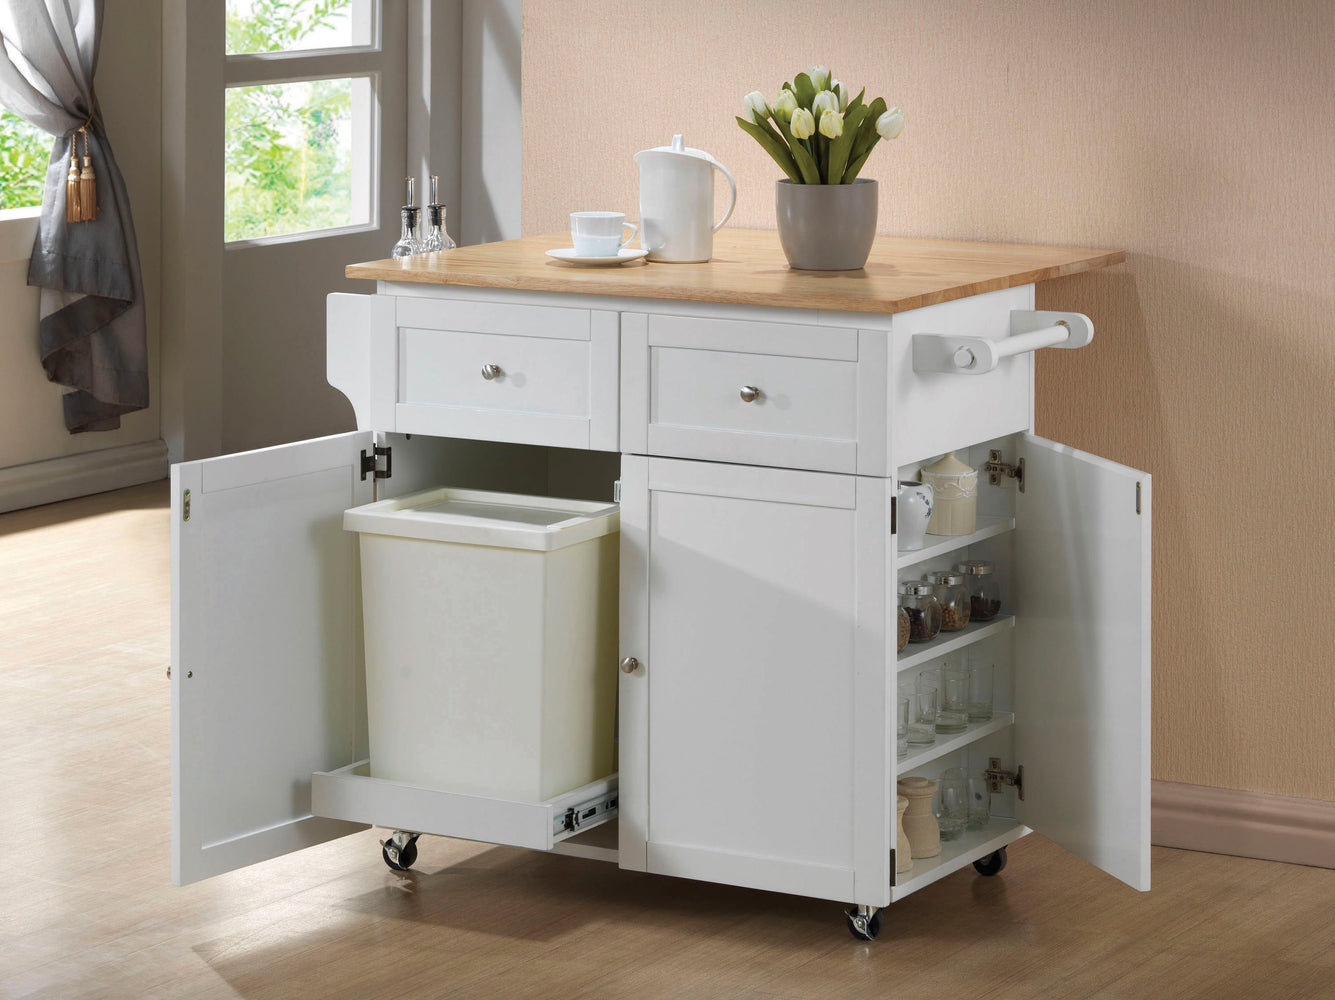 3-Door Kitchen Cart With Casters Natural Brown And White